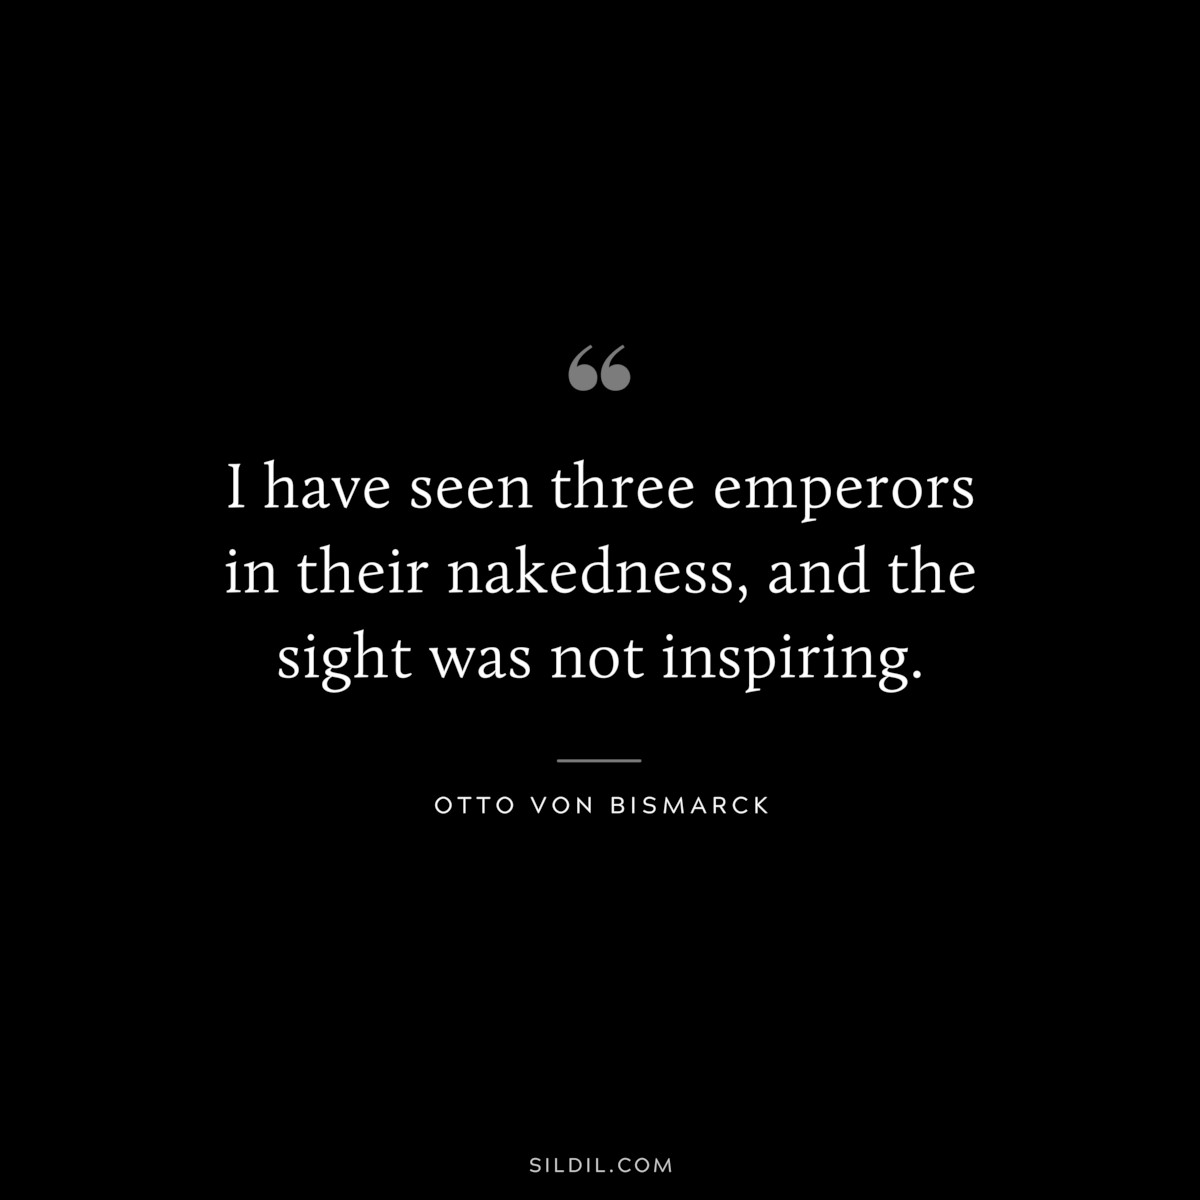 I have seen three emperors in their nakedness, and the sight was not inspiring. ― Otto von Bismarck